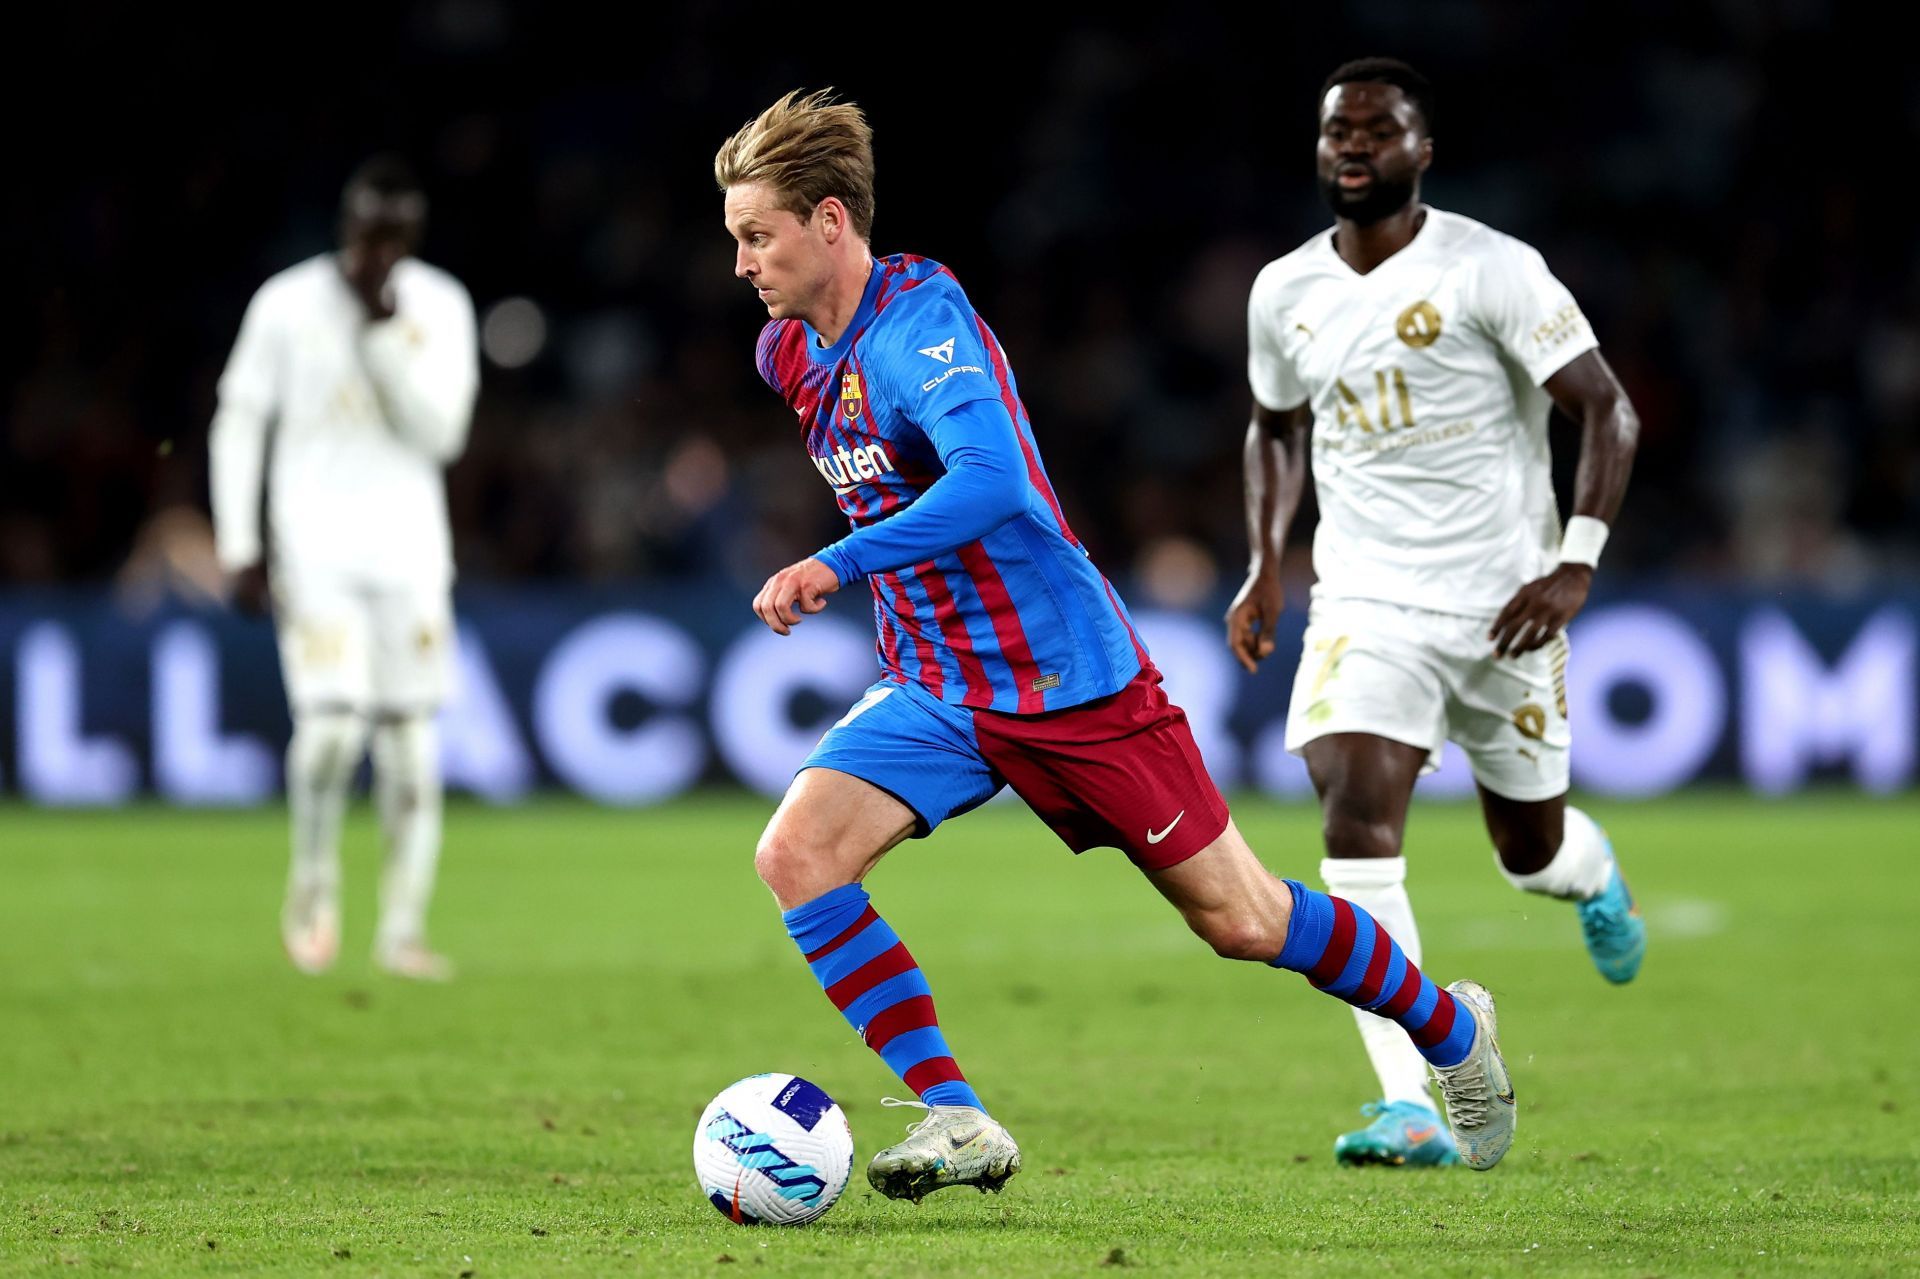 De Jong will need to make a decision on his future